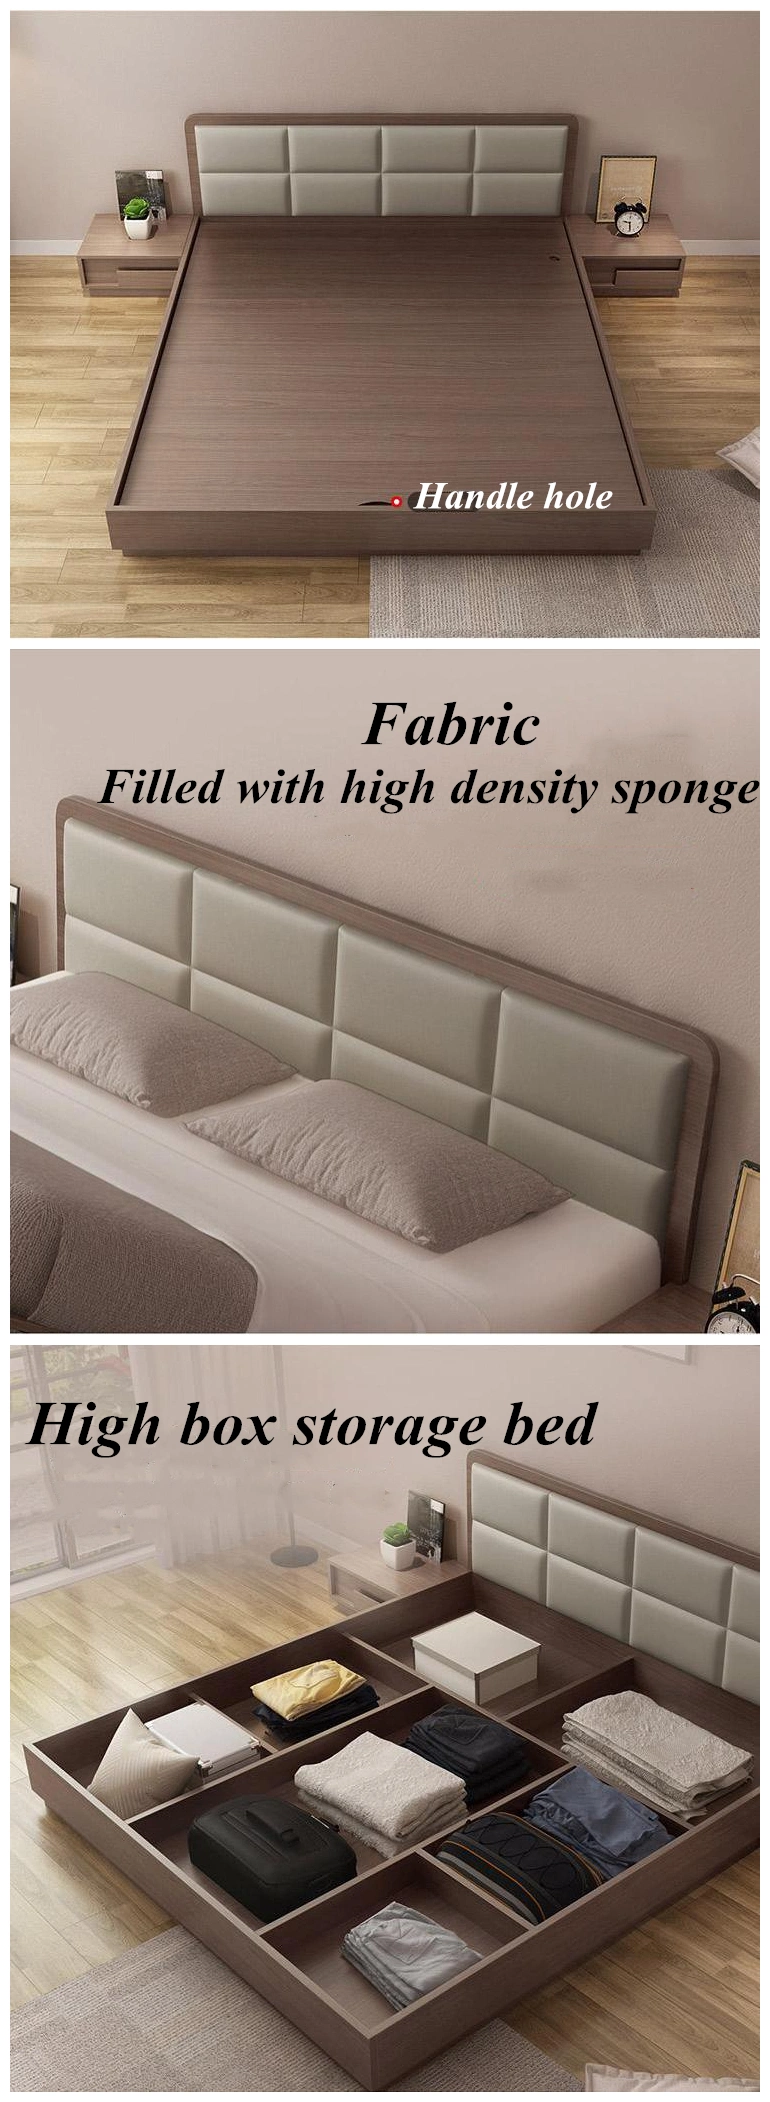 Modern Wholesale Home Hotel Wooden Sofa Double Wall Bed Bedroom Furniture Sets